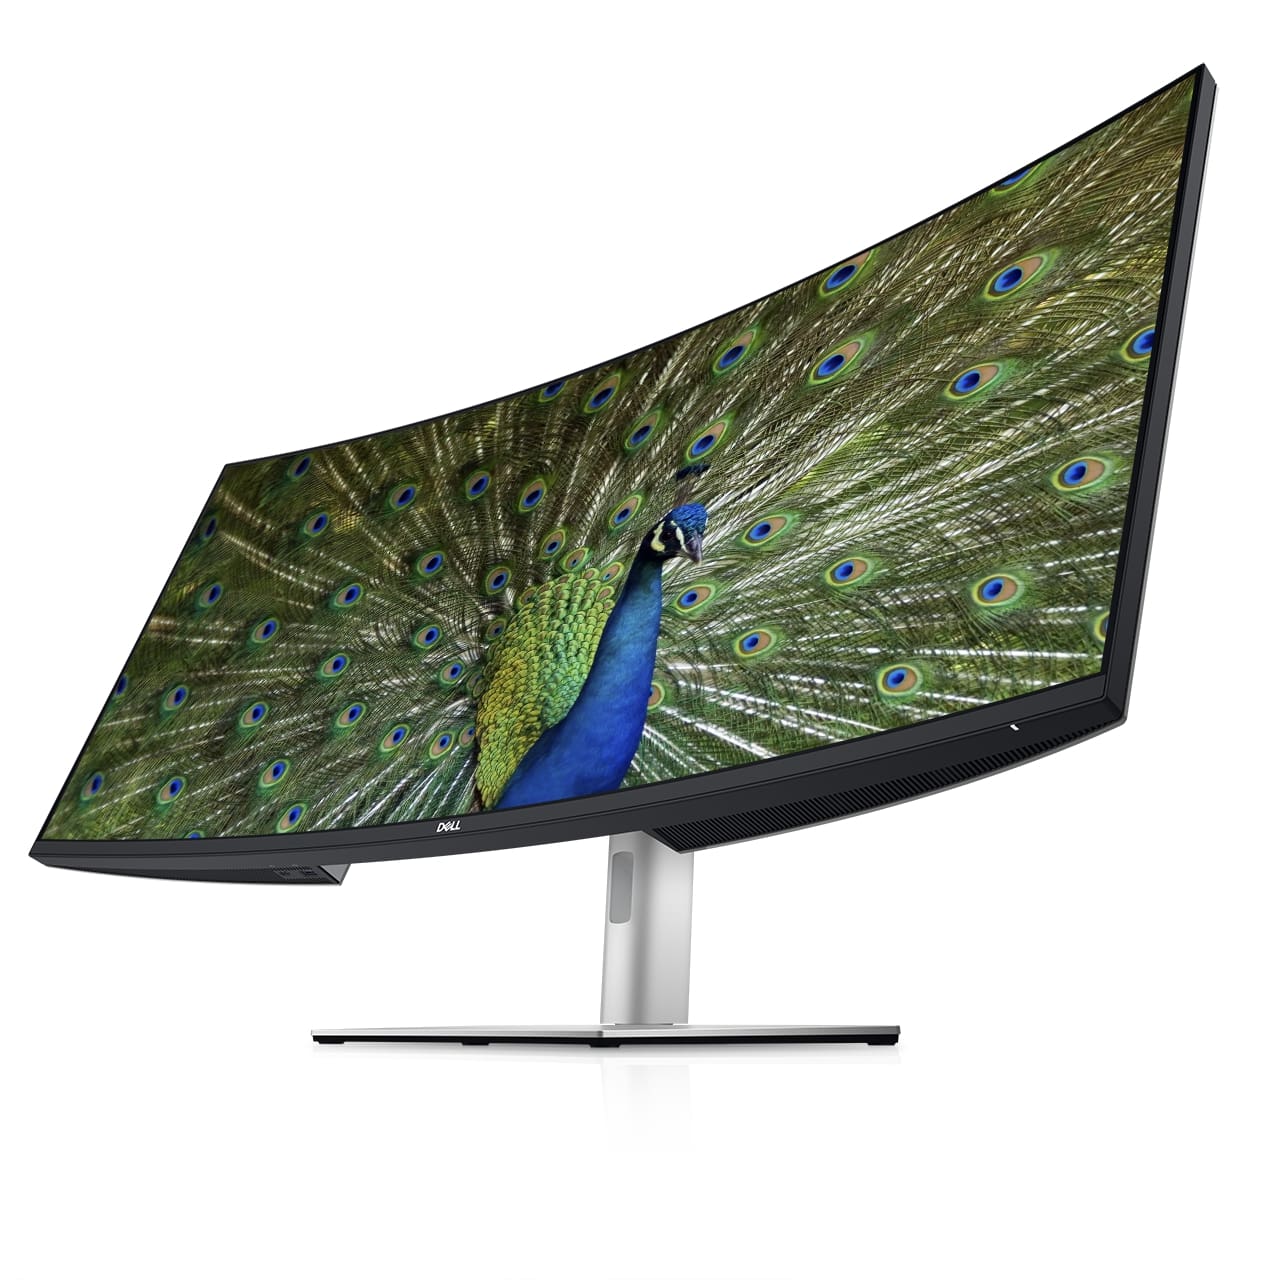 dell refreshes ultrasharp monitors ces 2021 40 curved monitor with speakers